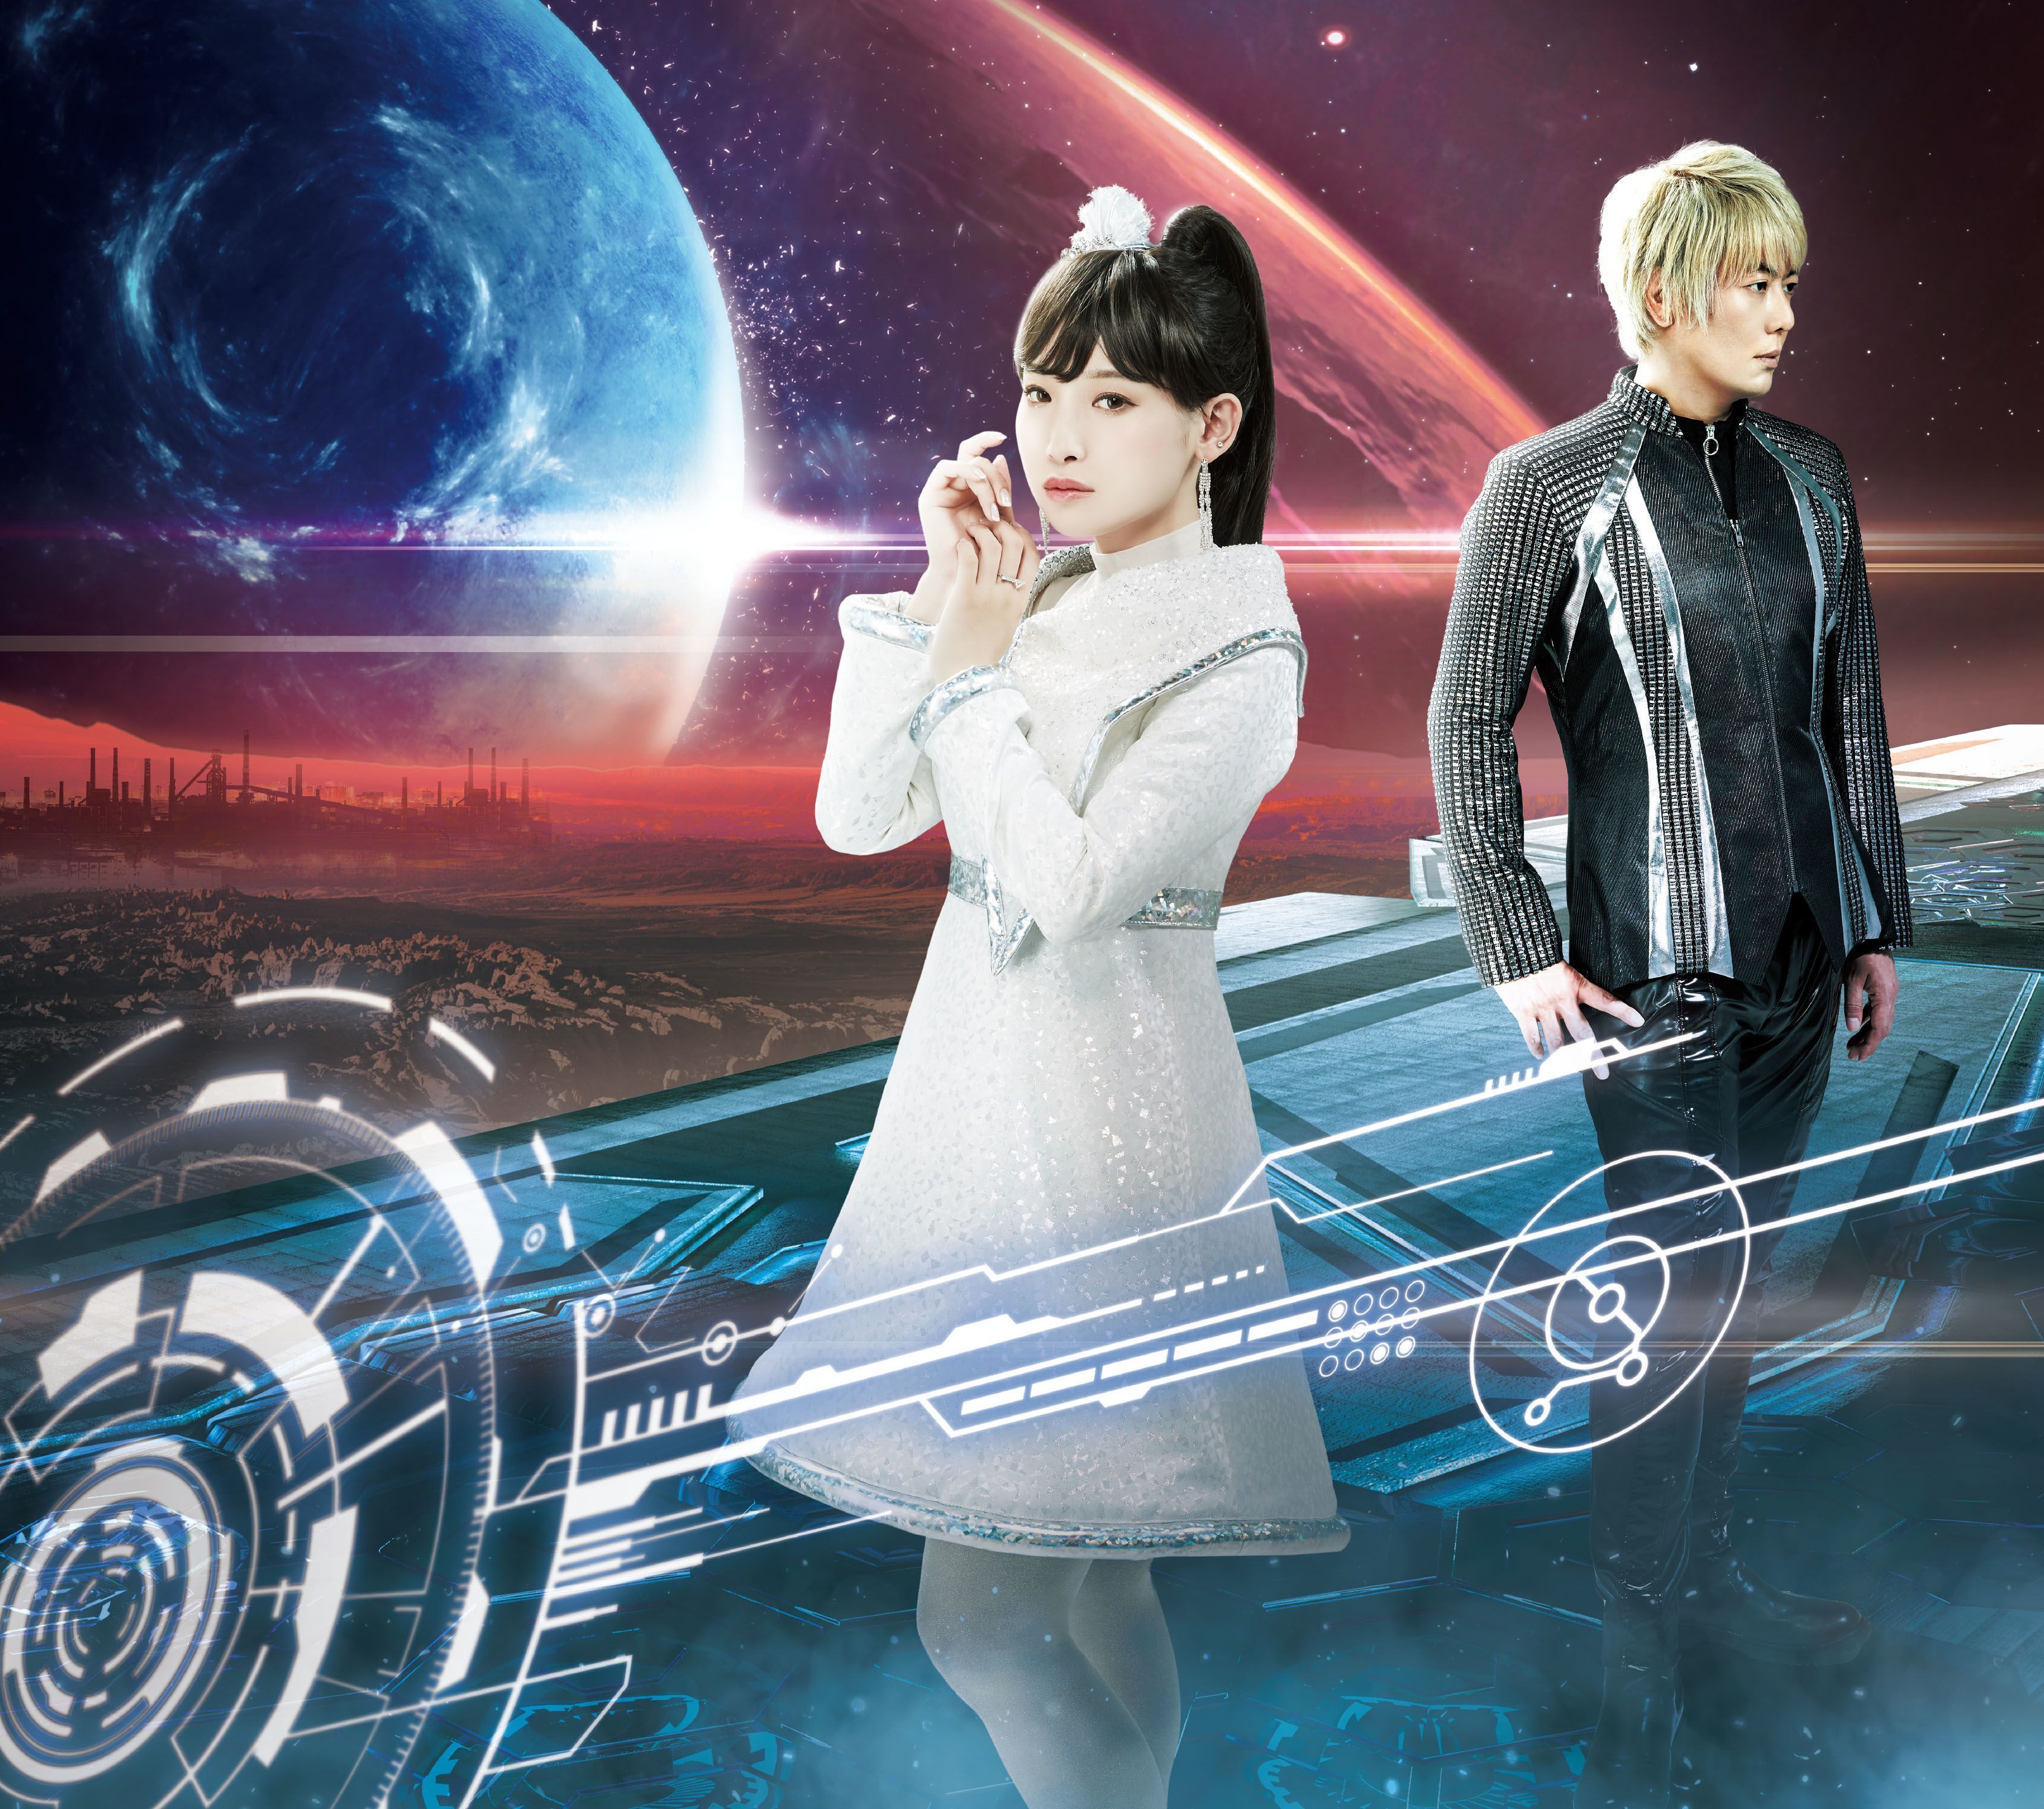 infinite synthesis 5 | fripSide OFFICIAL SITE